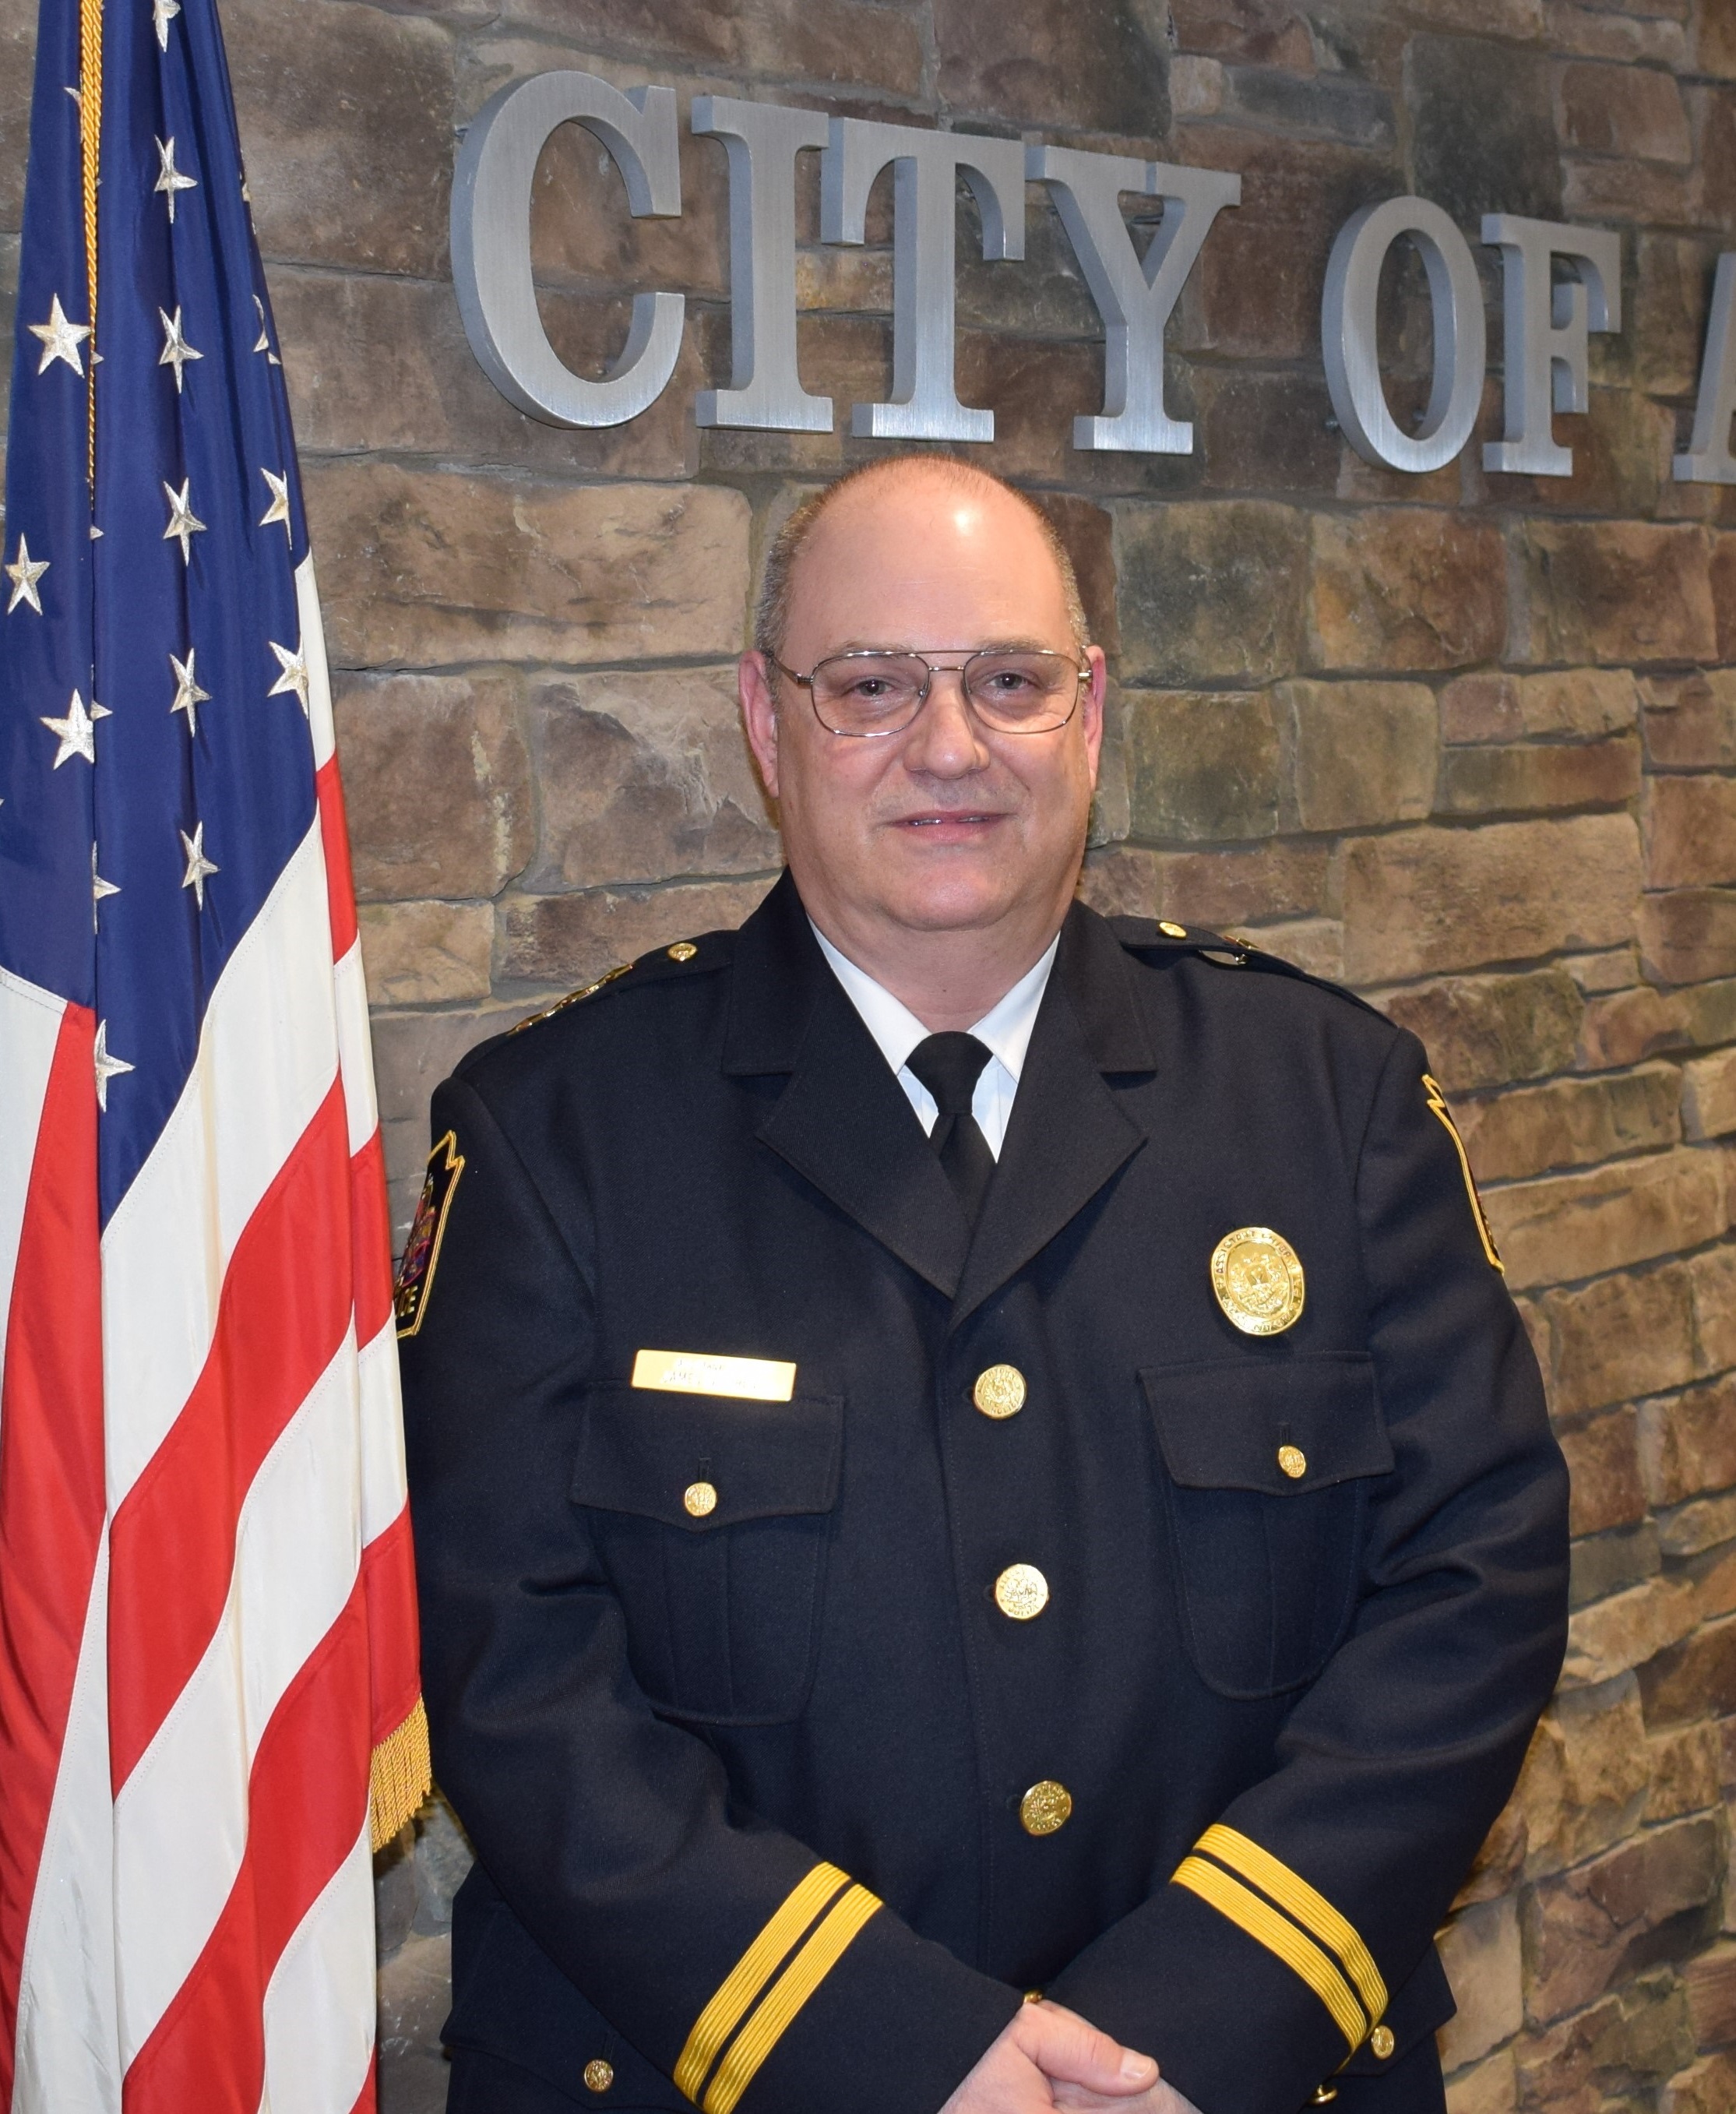 Assistant Chief of Police James Gress